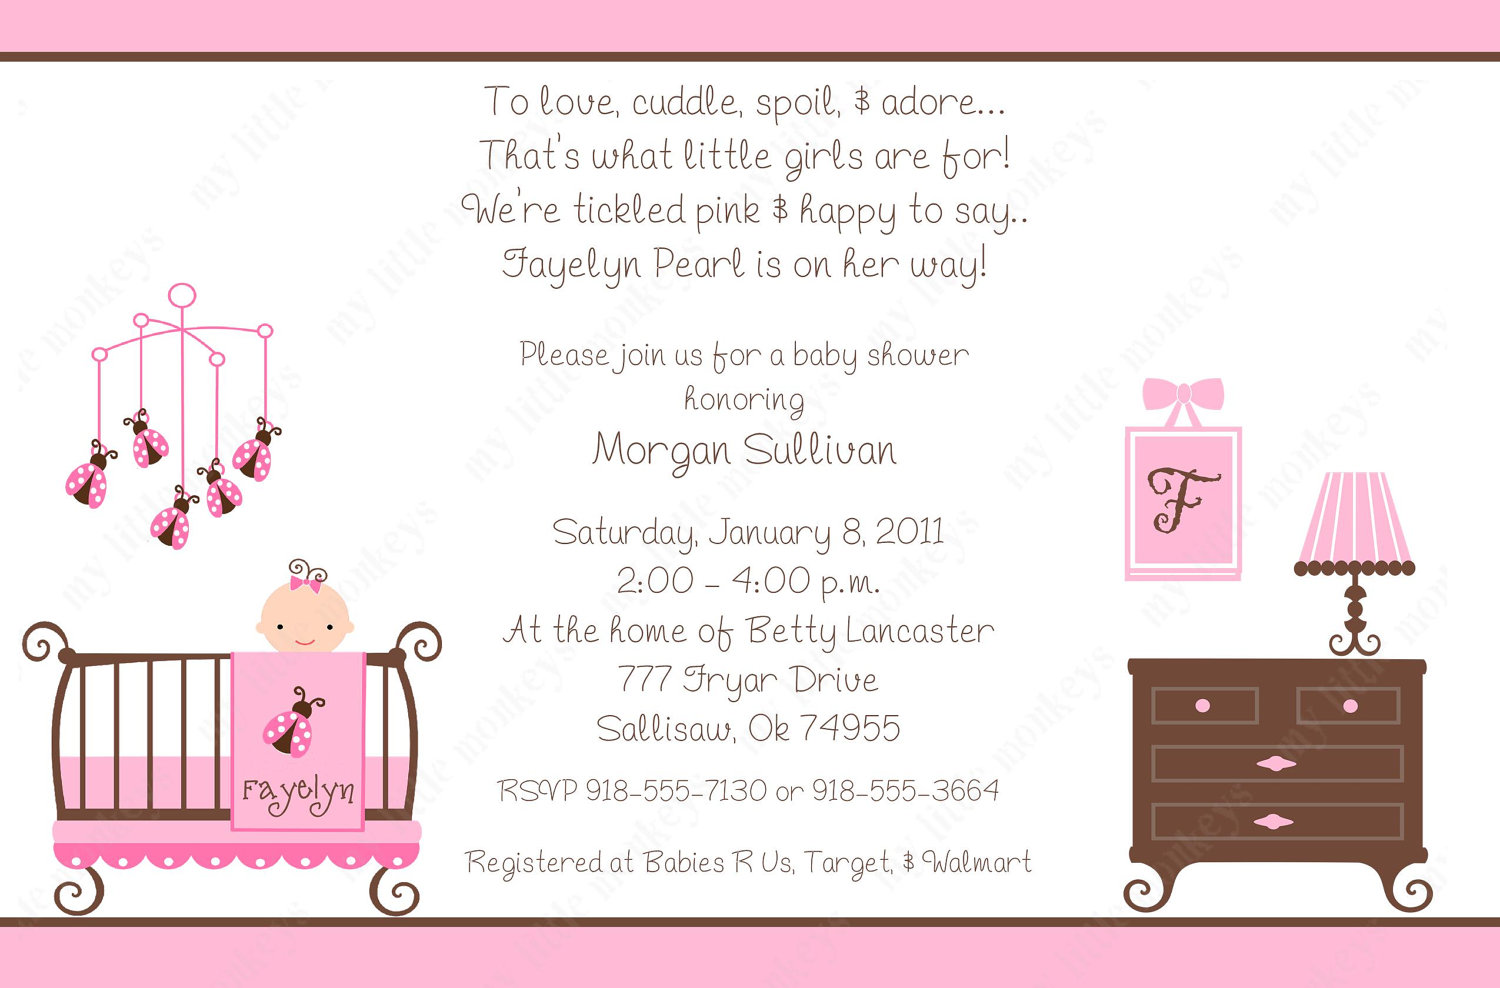 Full Size of Baby Shower:cheap Invitations Baby Shower Homemade Baby Shower Decorations Baby Shower Centerpiece Ideas For Boys Homemade Baby Shower Centerpieces Baby Girl Themes For Baby Shower Baby Shower Themes Baby Shower Ideas Baby Shower Decorations Printable Baby Shower Invitations For Girl